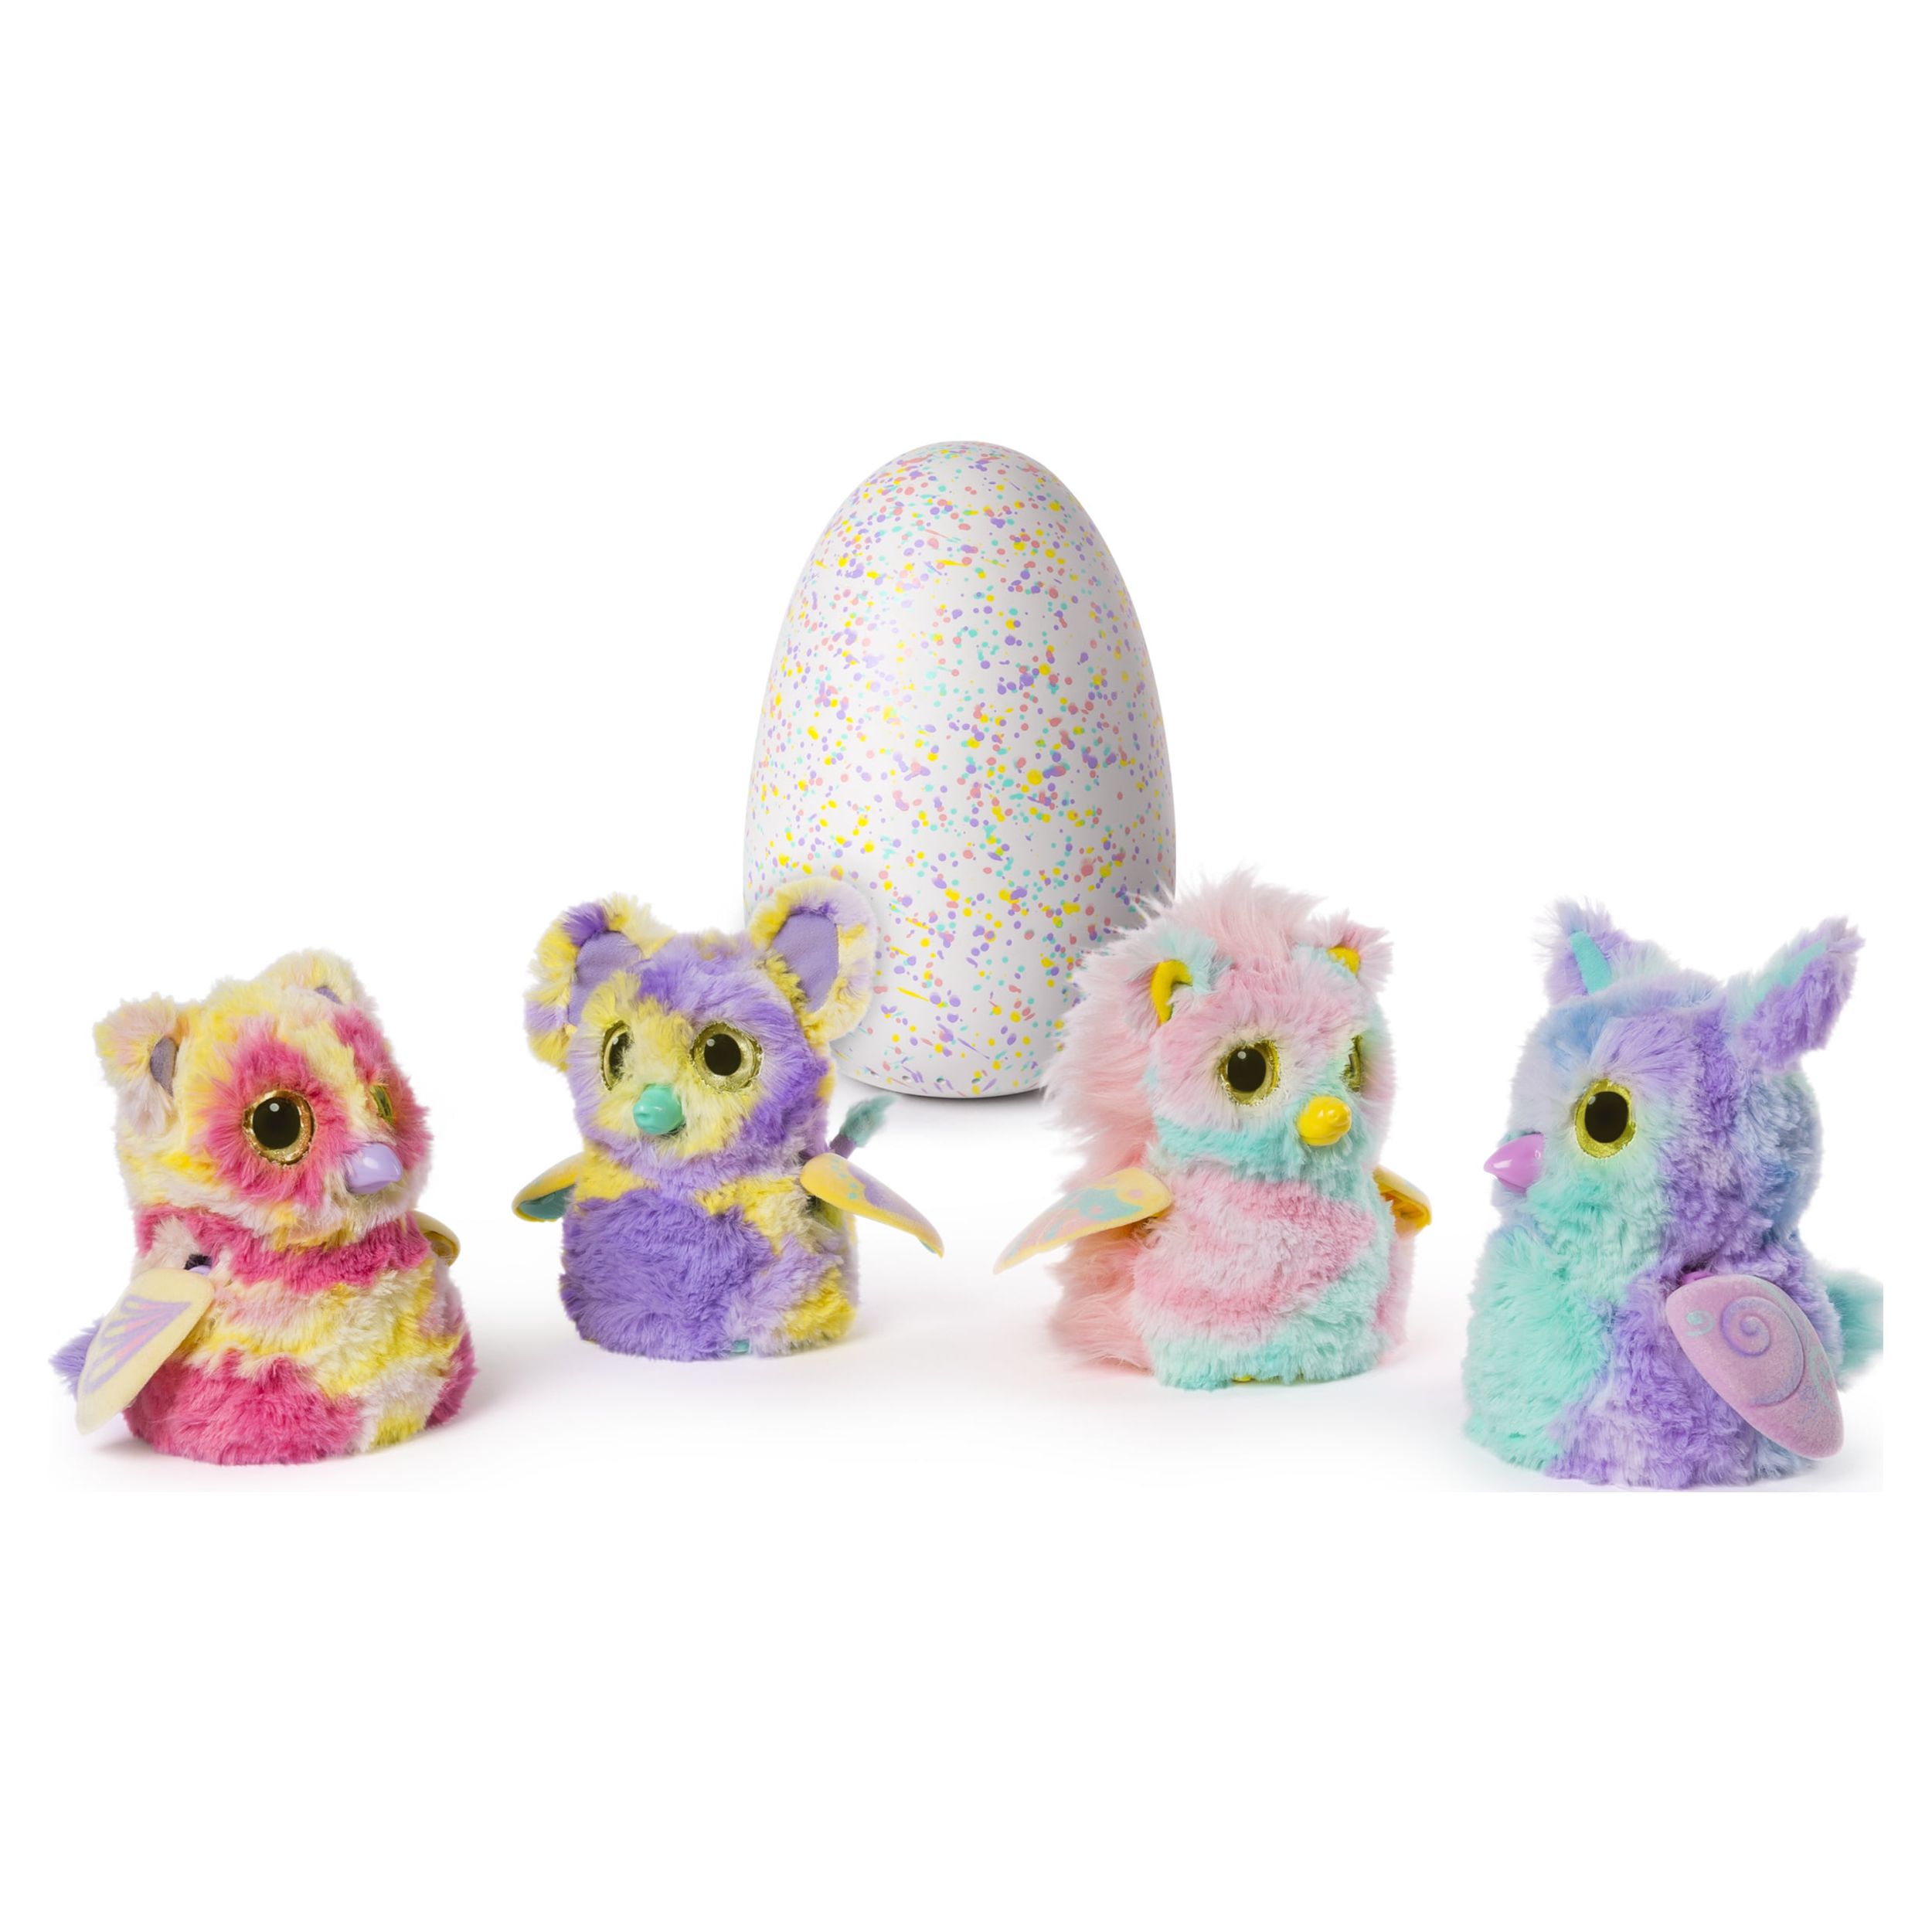 Hatchimals Mystery Egg, Hatch 1 of 4 Interactive Mystery Characters (Styles May Vary), Multicolor - image 3 of 10